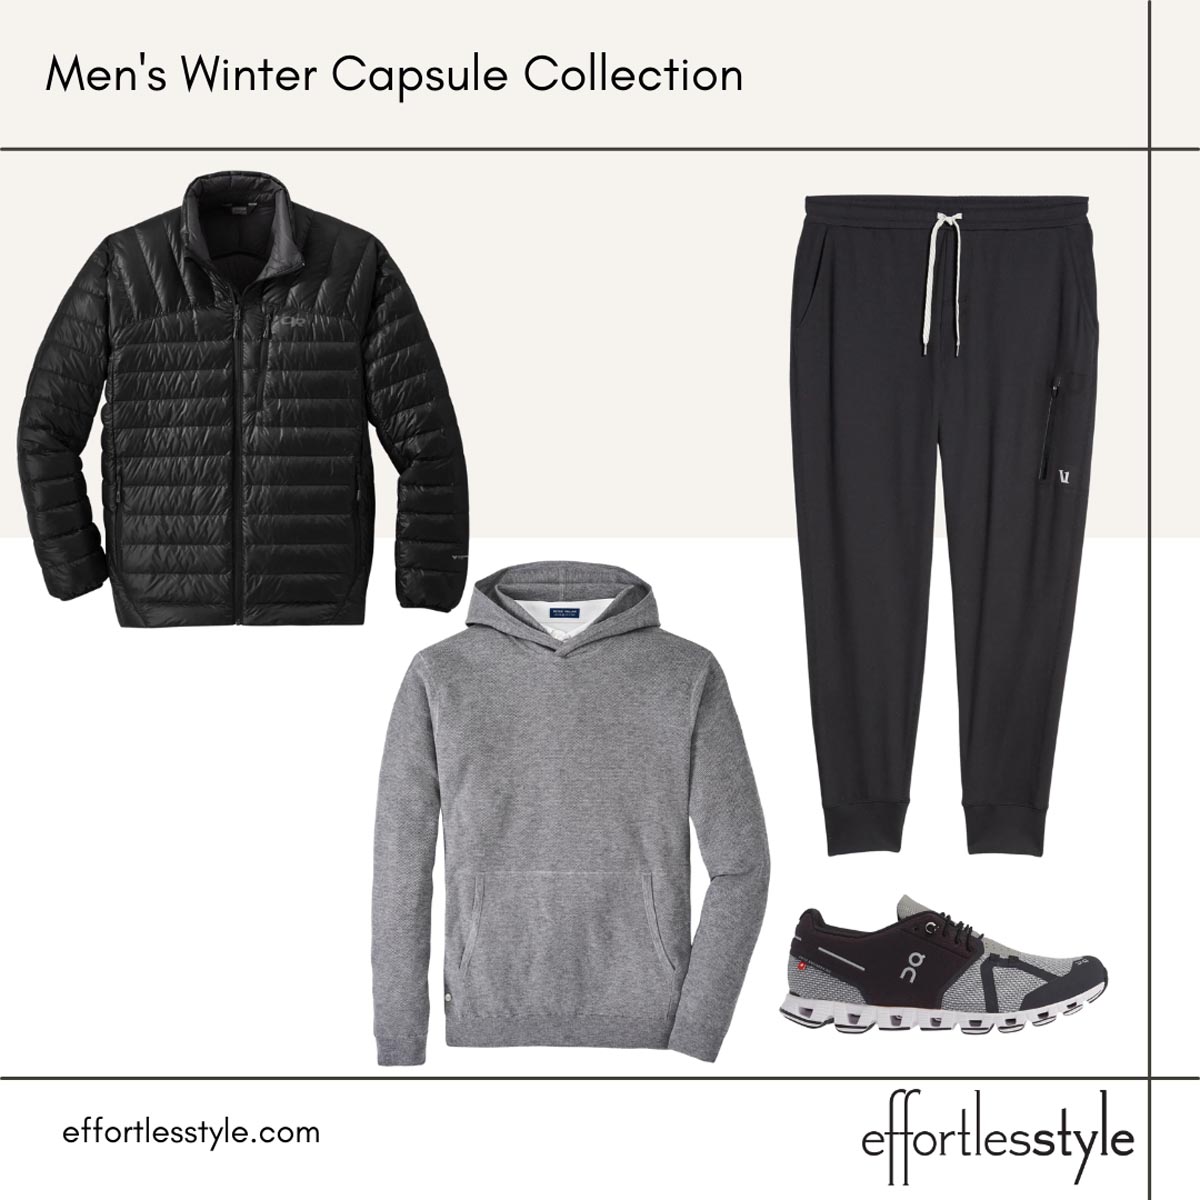 Men's Winter Capsule Collection Styled Looks hoodie how to wear a hoodie hoodie looks for guys men's hoodie outfits how to wear a hoodie with joggers